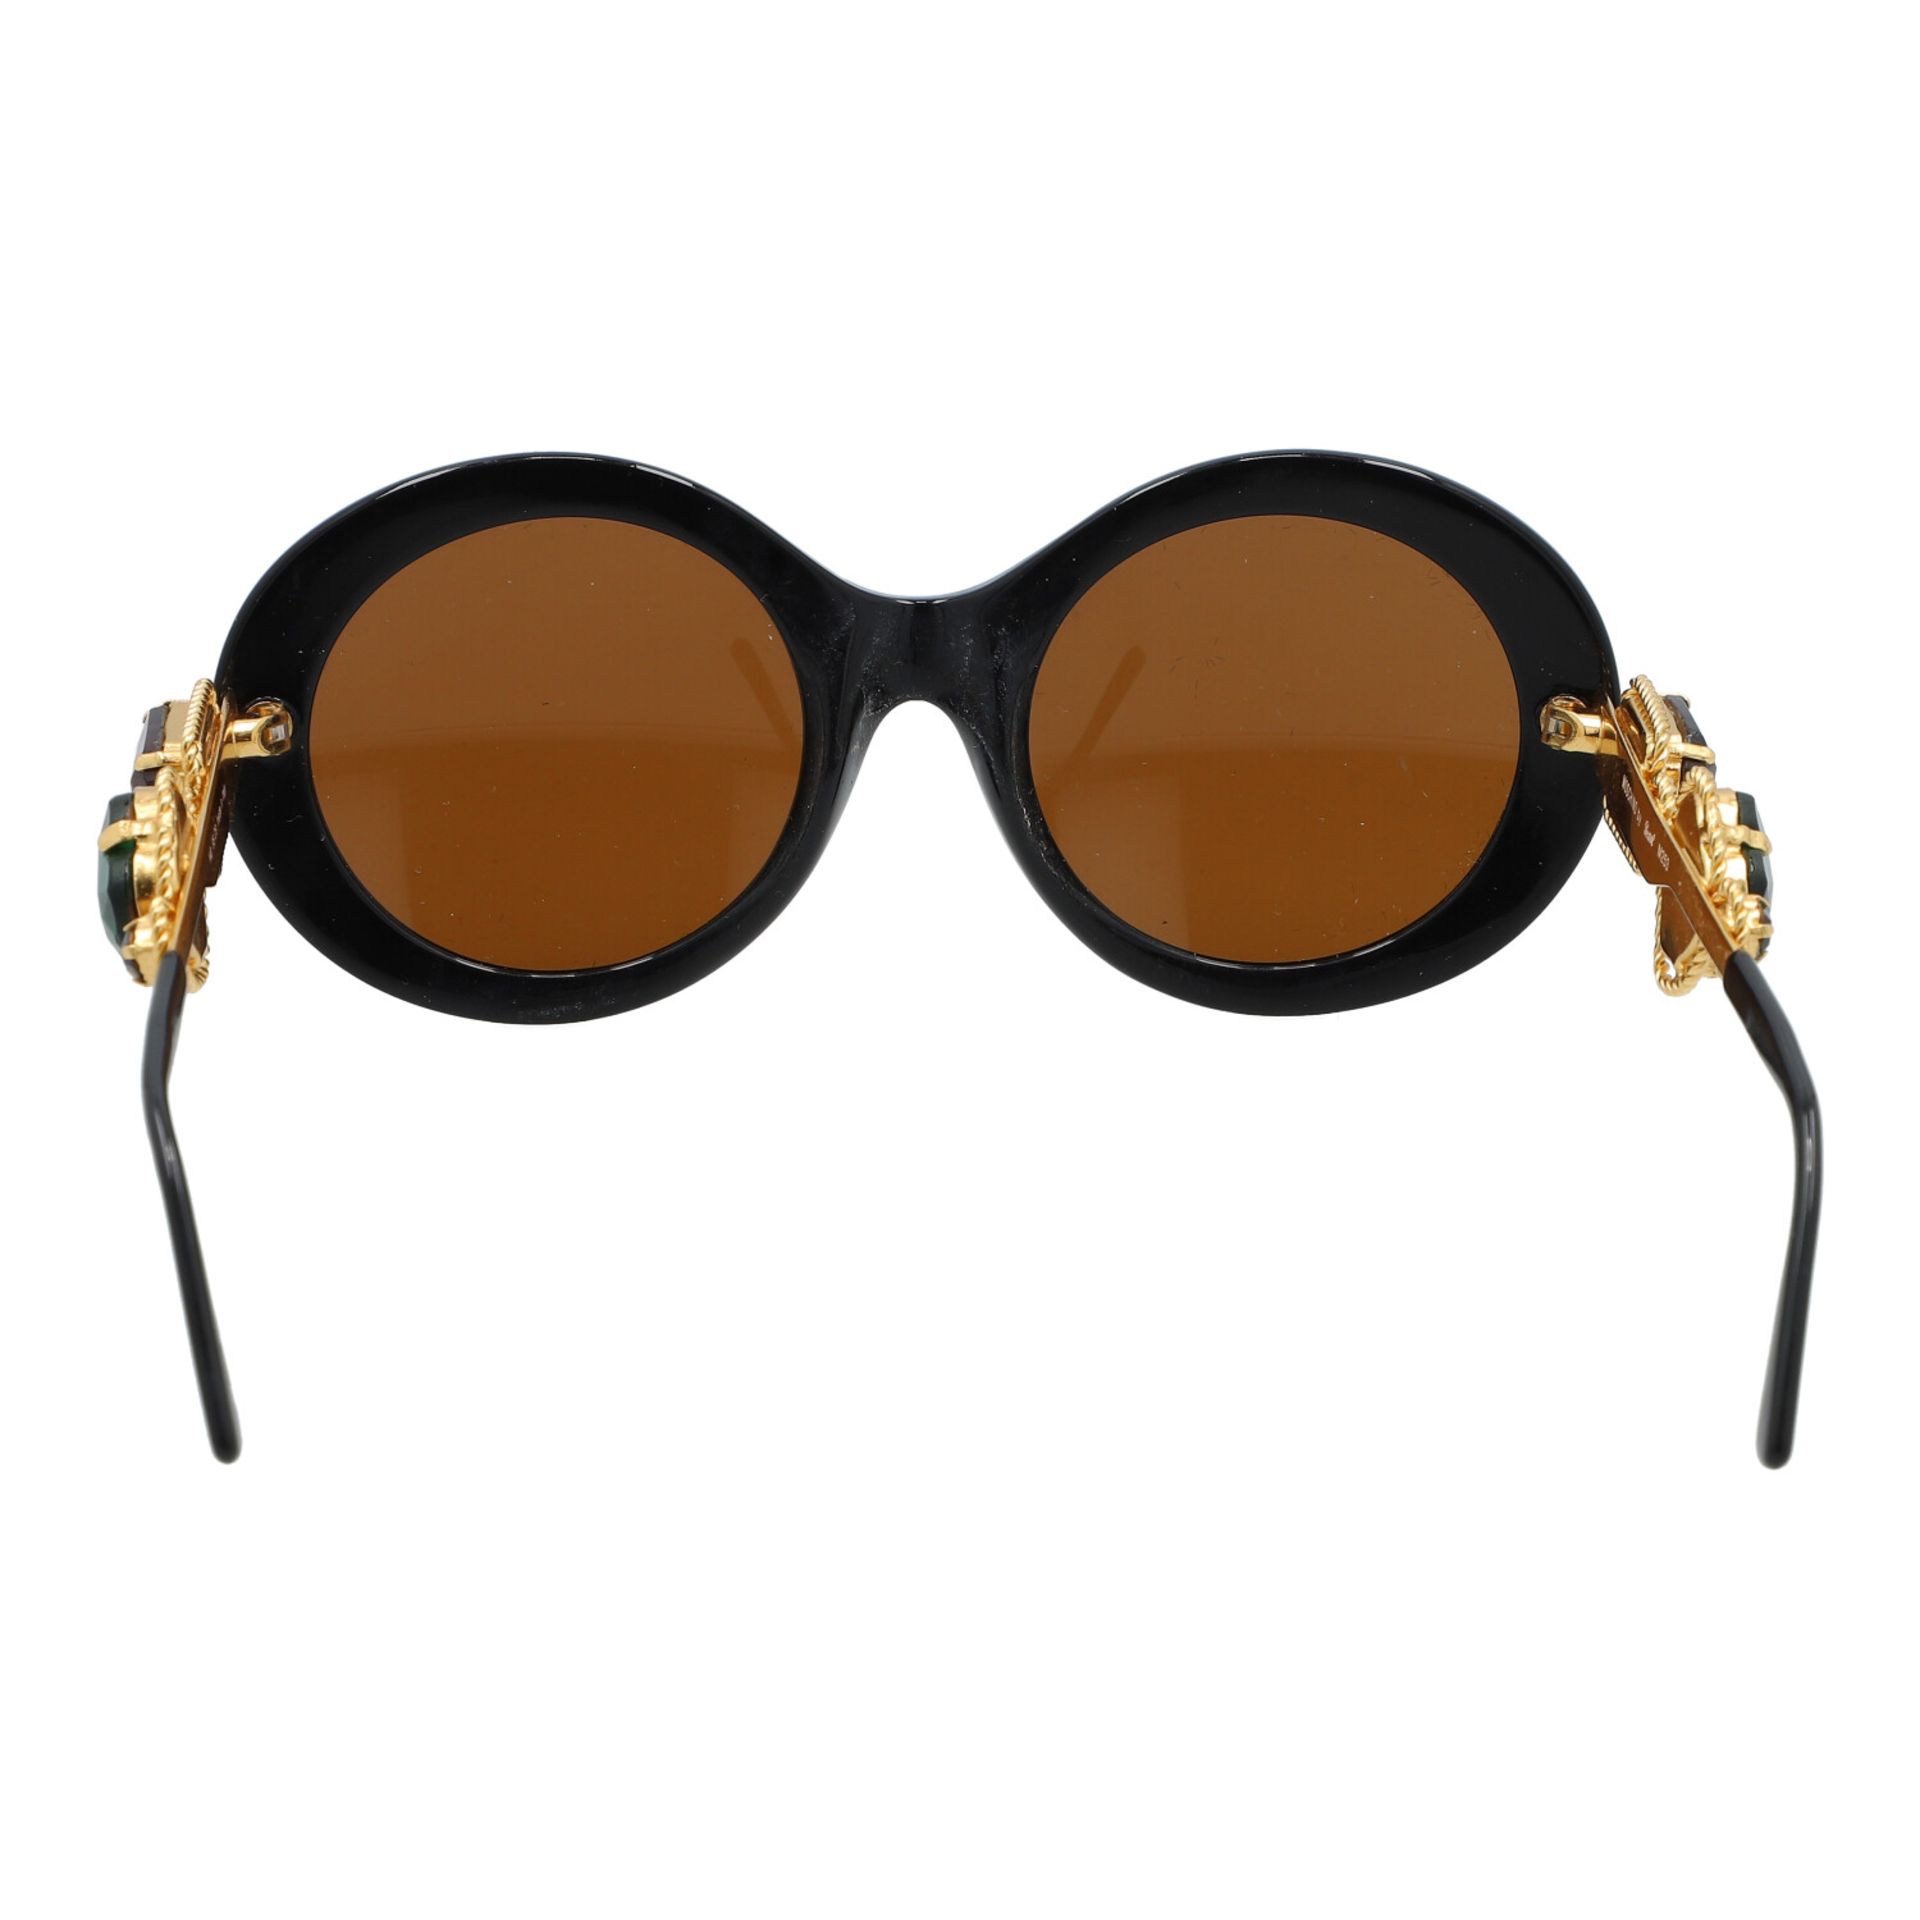 MOSCHINO BY PERSOL VINTAGE Sonnenbrille "M253 - LADY GAGA", Koll.: 1989. - Image 4 of 6